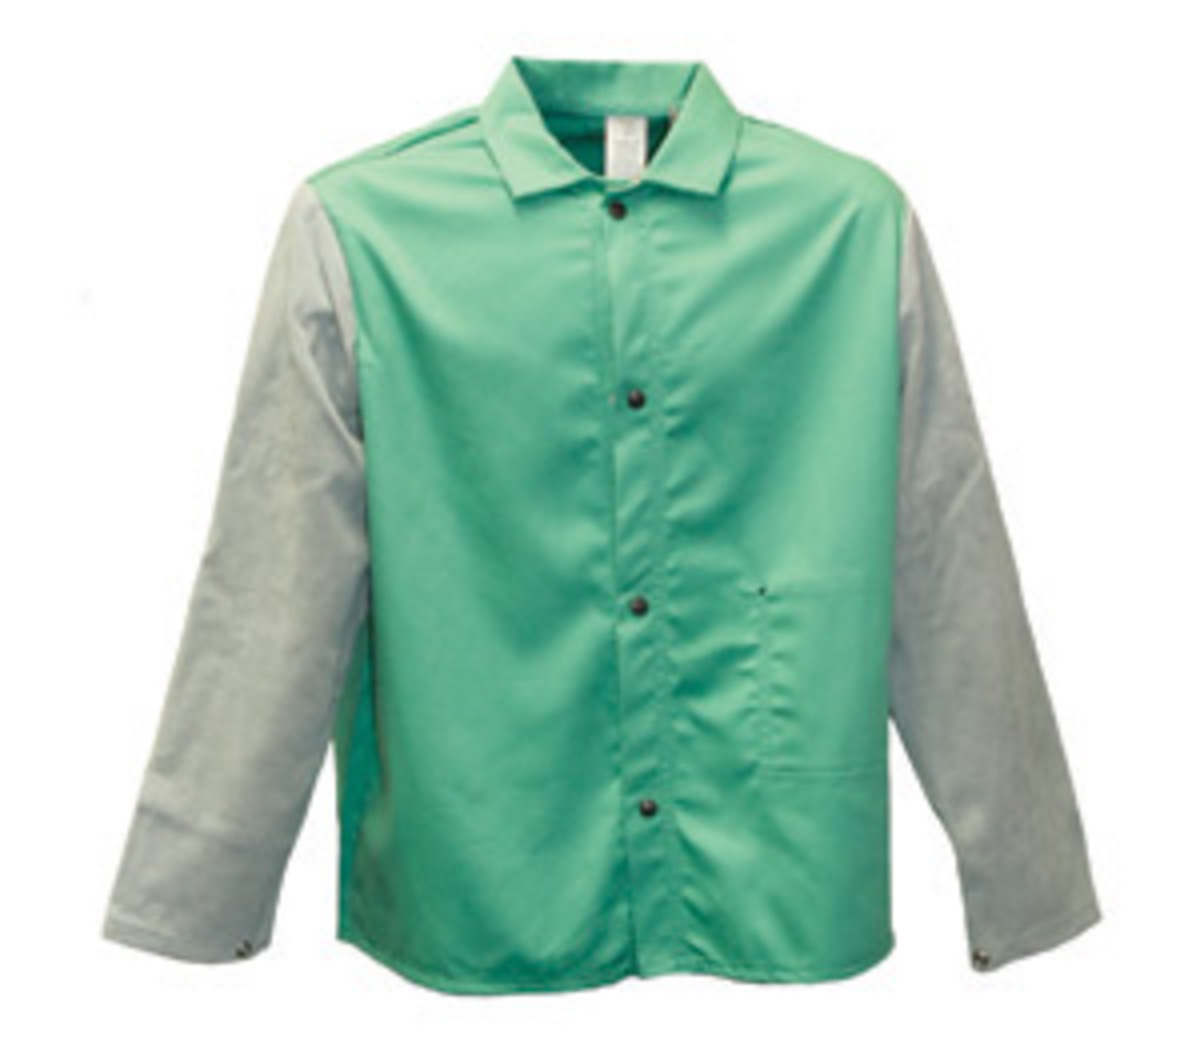 Stanco Safety Products™ Size 3X Green Cotton Leather Sleeves Flame Resistant Welding Jacket With Snap Closure